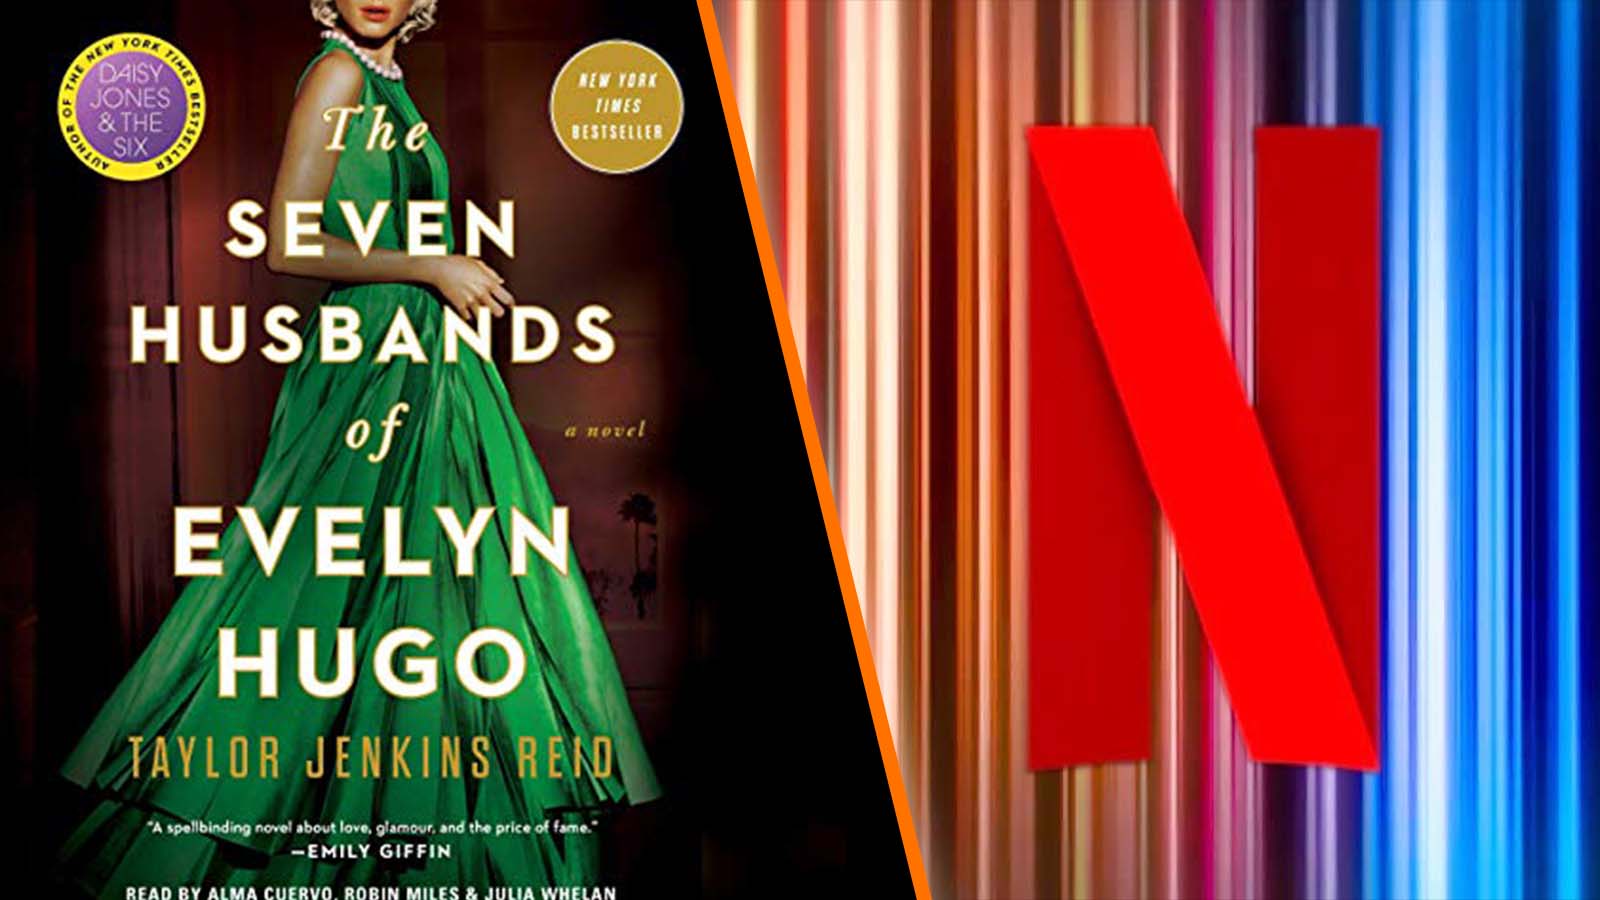 Everything We Know About 'The Seven Husbands of Evelyn Hugo' on Netflix